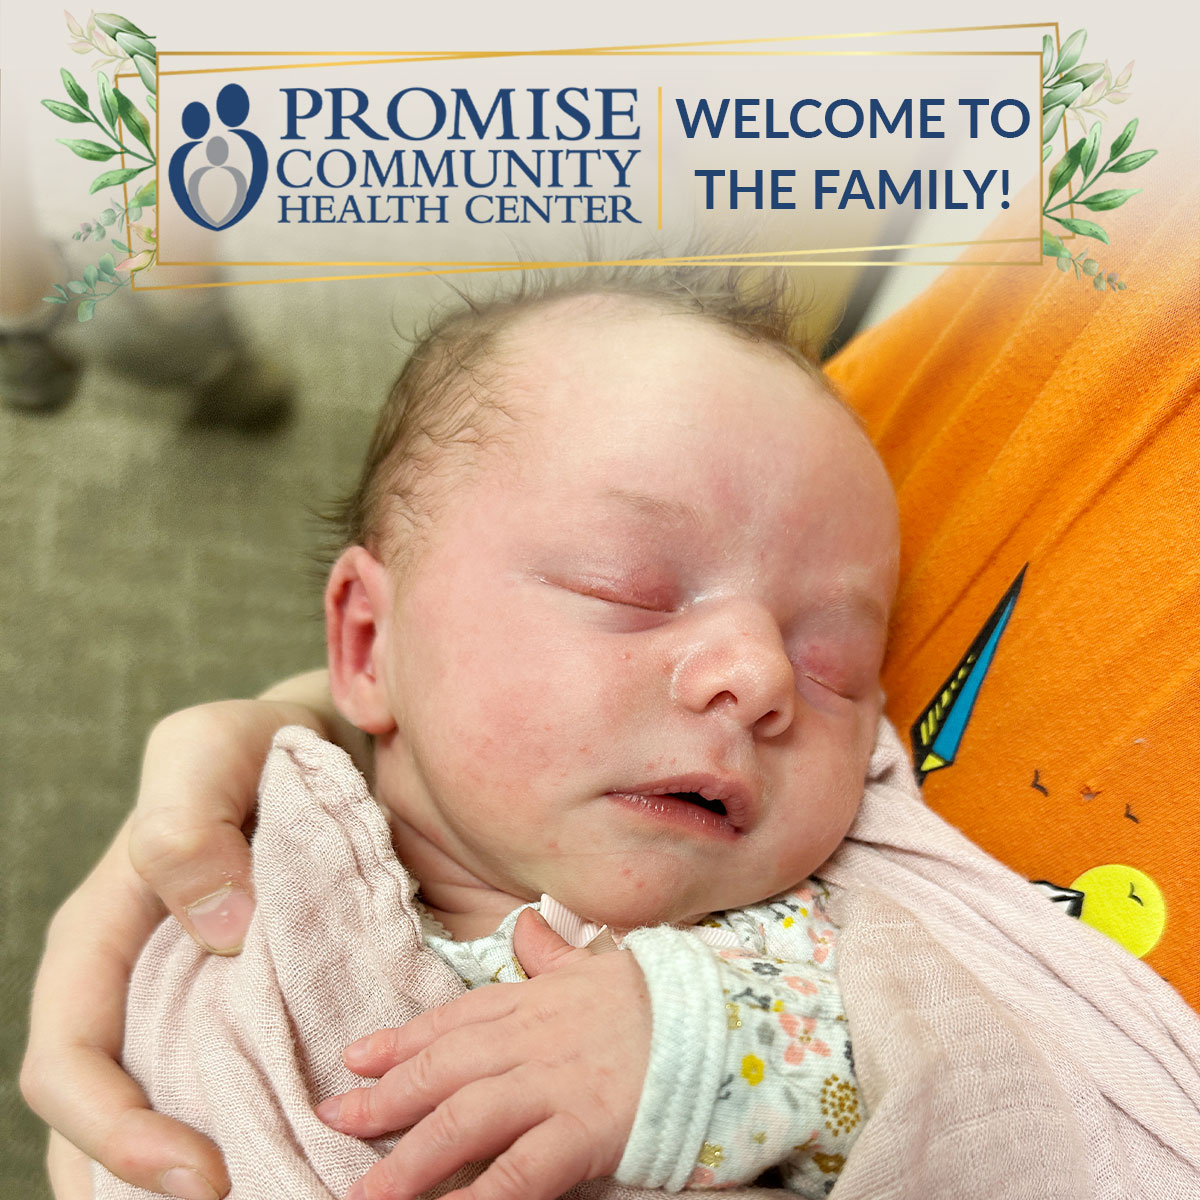 Home birth in George, Iowa | Promise Community Health Center in Sioux Center, Iowa | Midwives in northwest Iowa, Midwives in southeast South Dakota, Midwives in southwest Minnesota | Midwives in Sioux Falls South Dakota, Midwives in Beresford South Dakota, Midwives in Sioux City IA, Midwives in LeMars IA, Midwives in Worthington MN, Midwives in Iowa, Midwives in South Dakota, Midwives in Minnesota